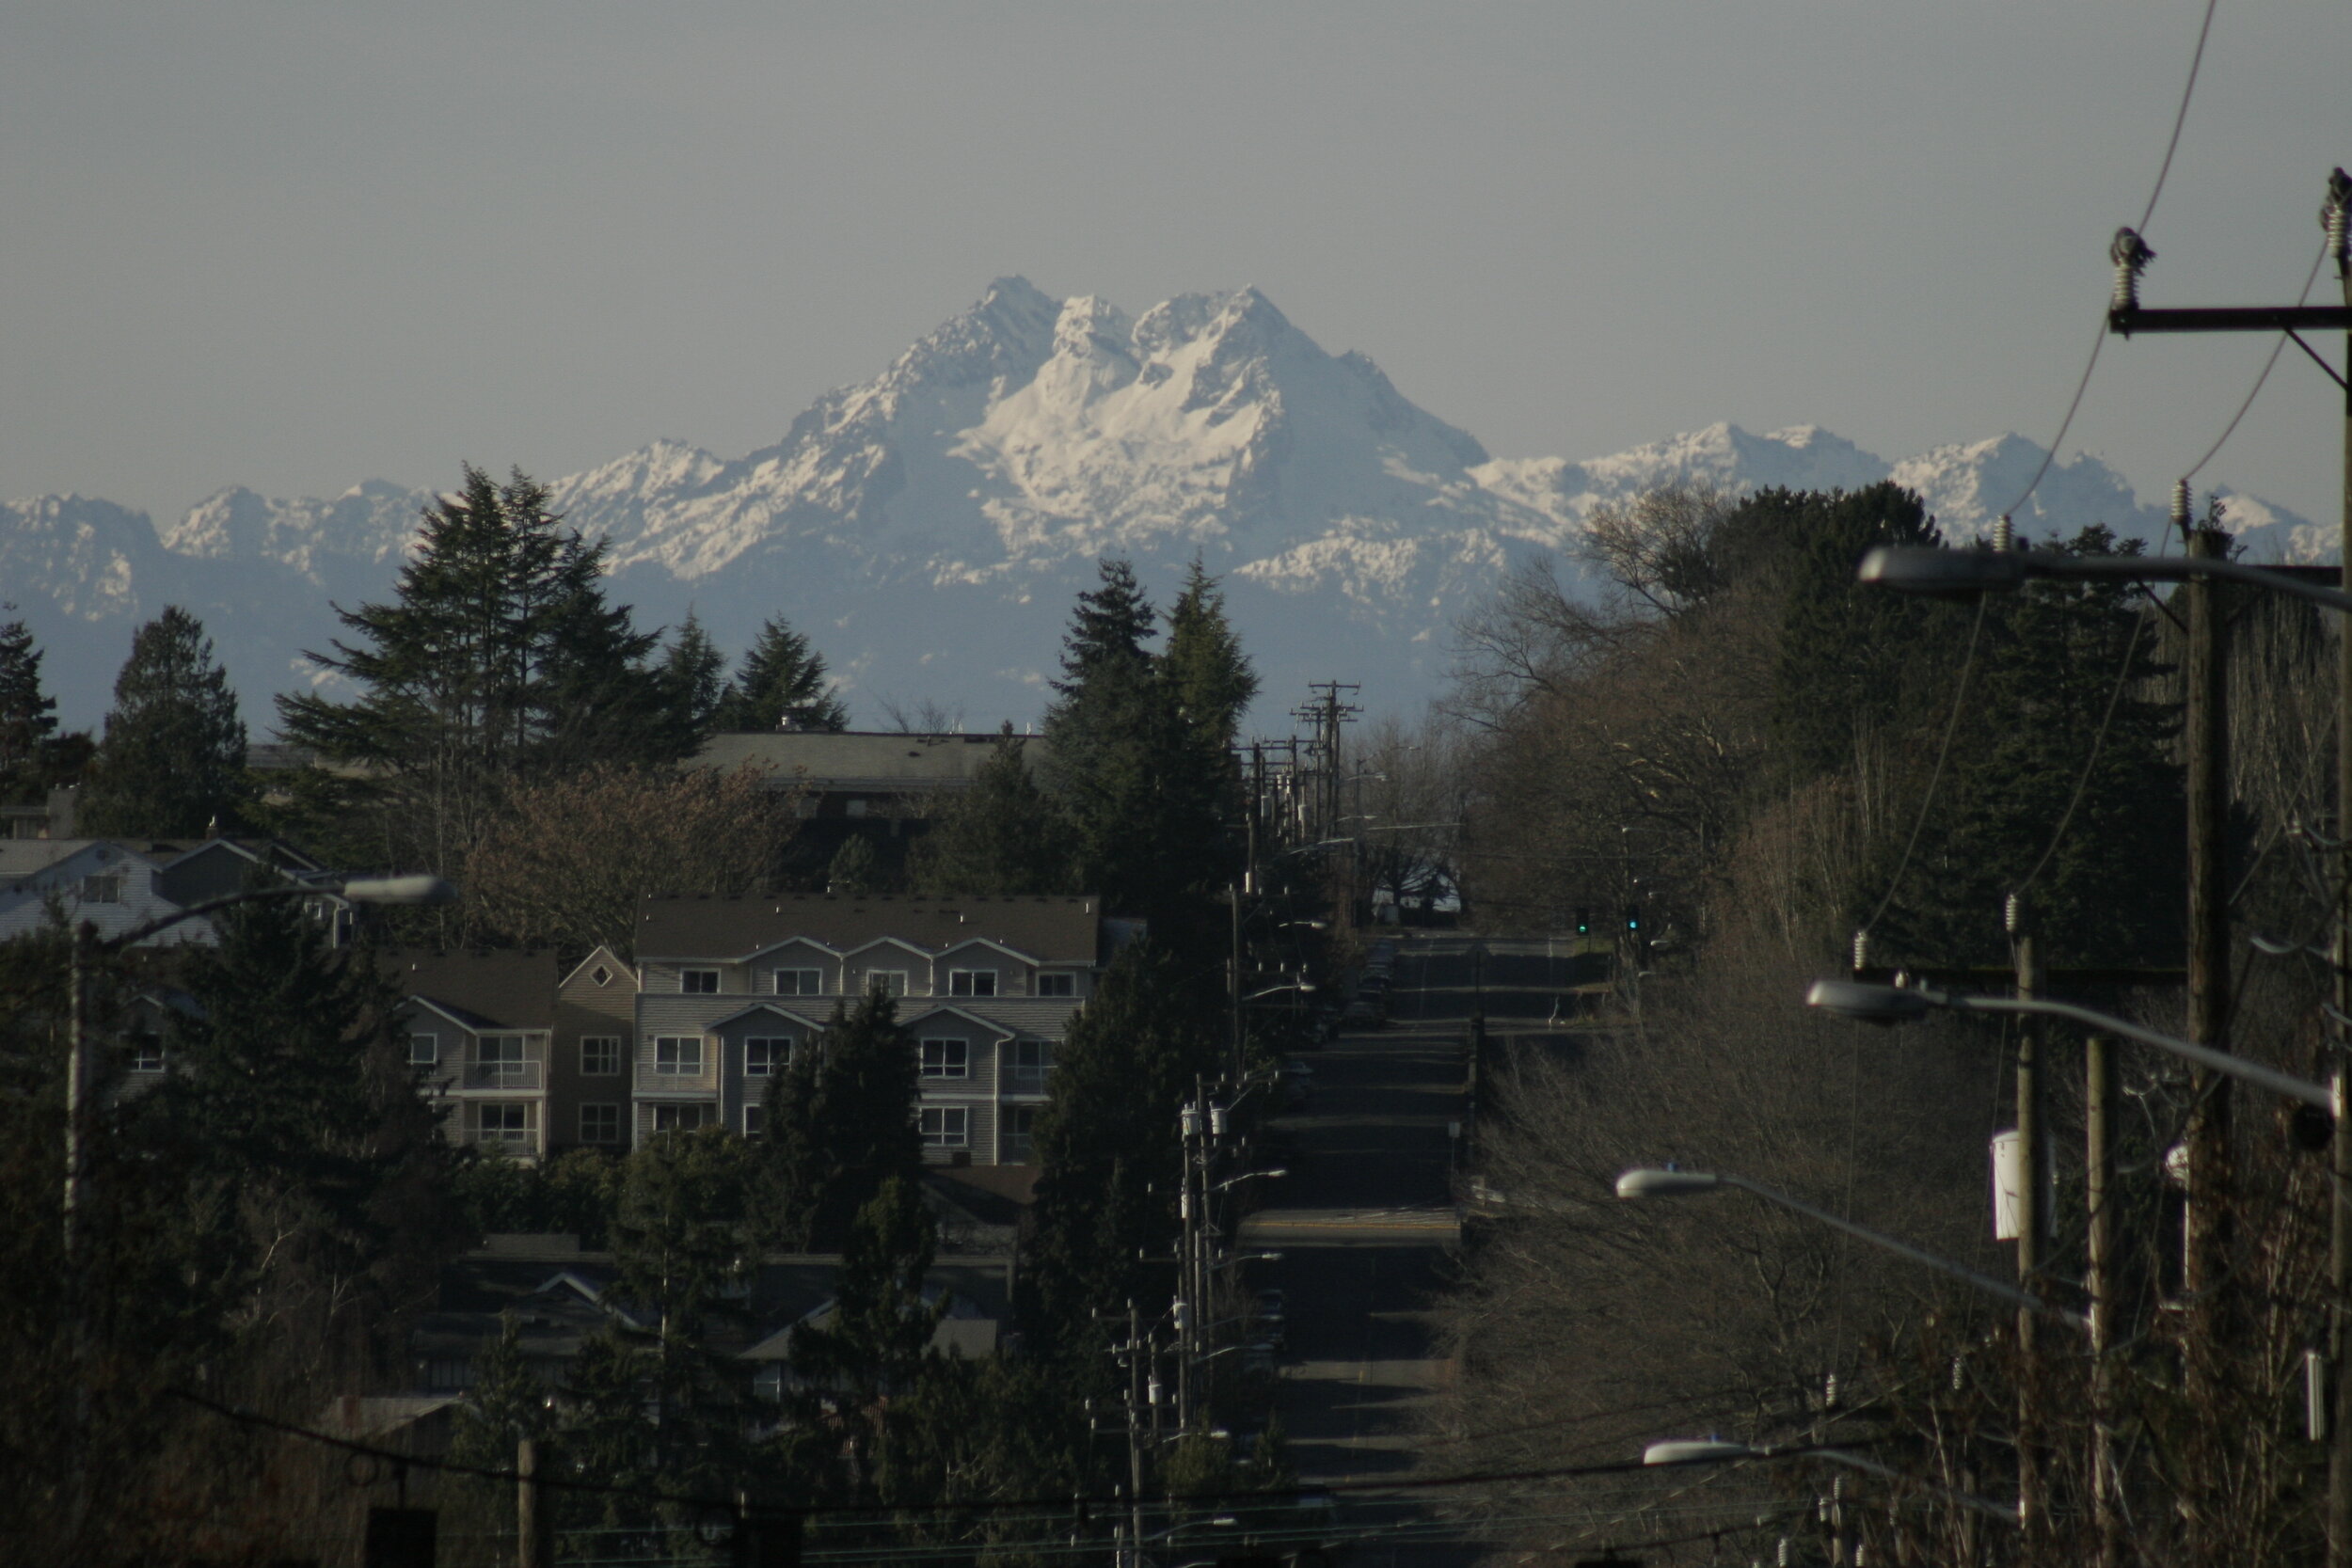 Olympic Mountains over Wallingford neighborhood from 50th Street - Seattle